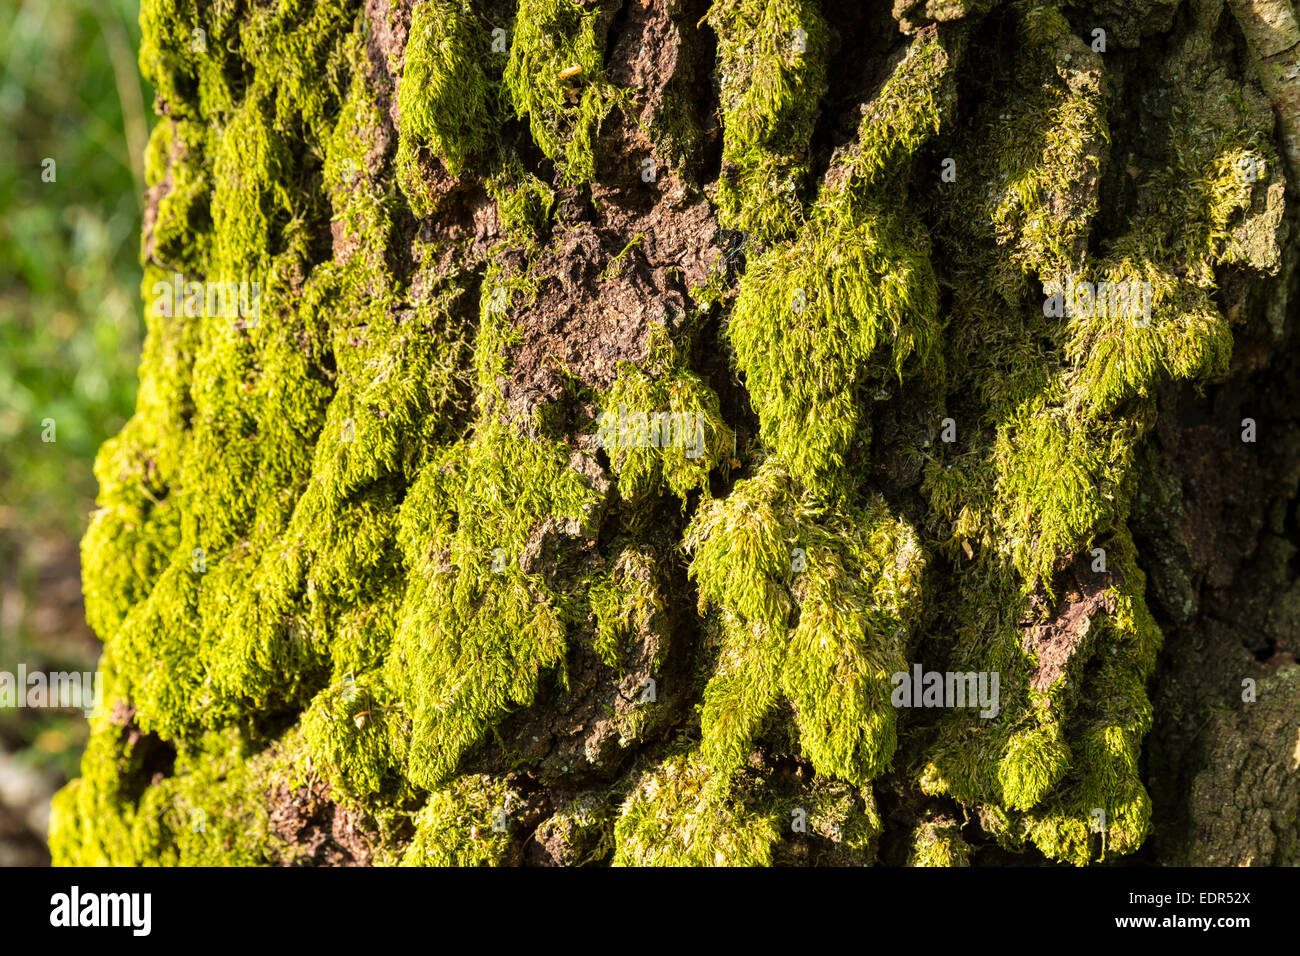 Tree moss Brachythecium rutabulum of the group Bryophyta on ancient tree in spring / summer at Bruern Wood in UK Stock Photo